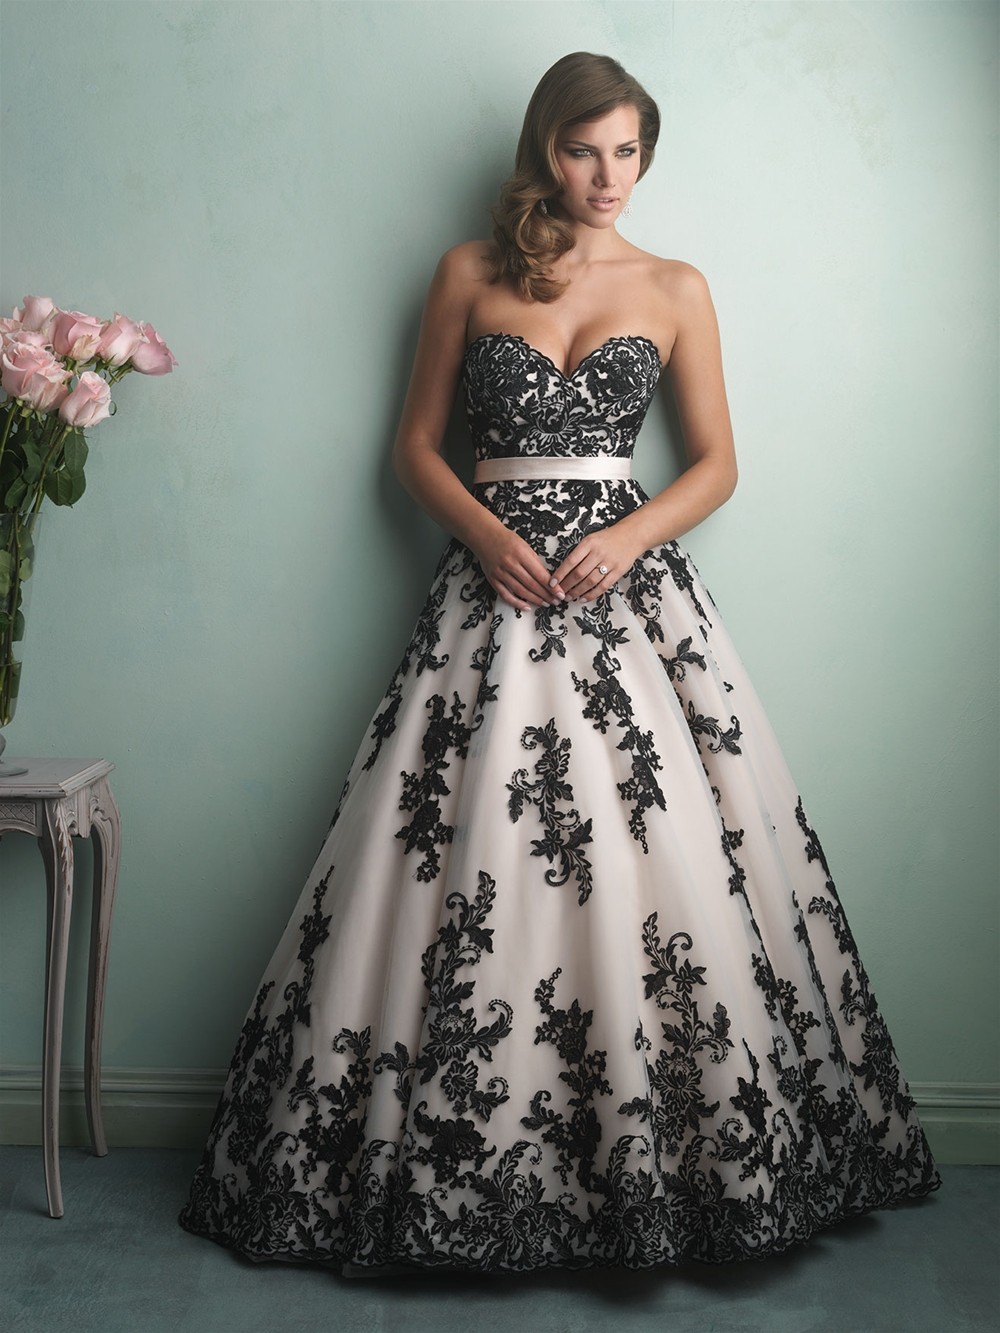 Sweetheart neckline lace black and white wedding dress